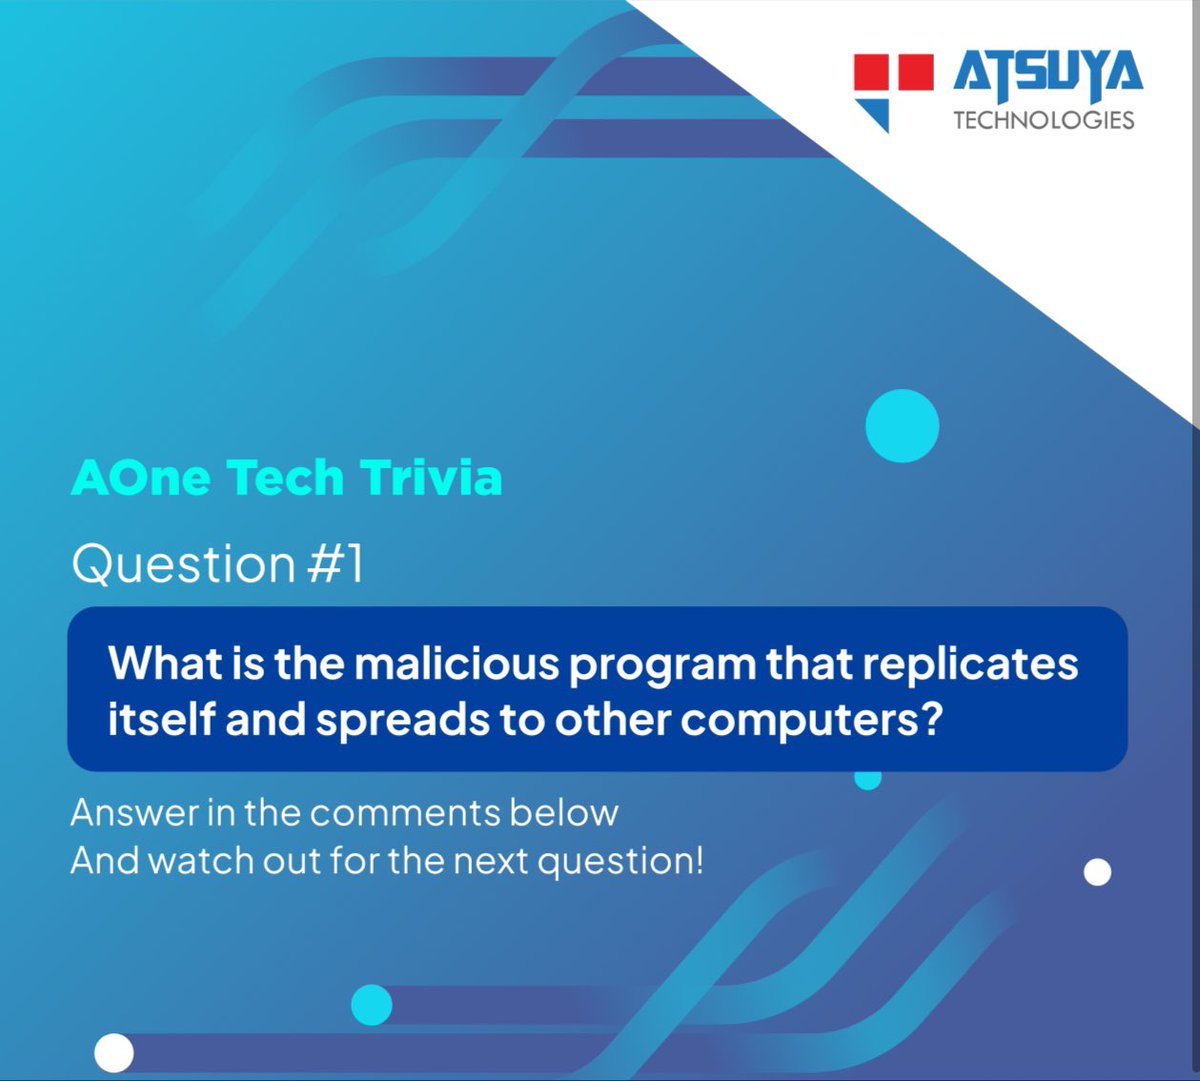 #ContestAlert!

This #NationalTechnologyDay, participate in the AOne #TechTrivia series and stand a chance to win an #Internship opportunity at Atsuya!

The first question is here! Comment your answer below, and stay tuned for the next question!

1/3
#Contest #Tech #DeepTech